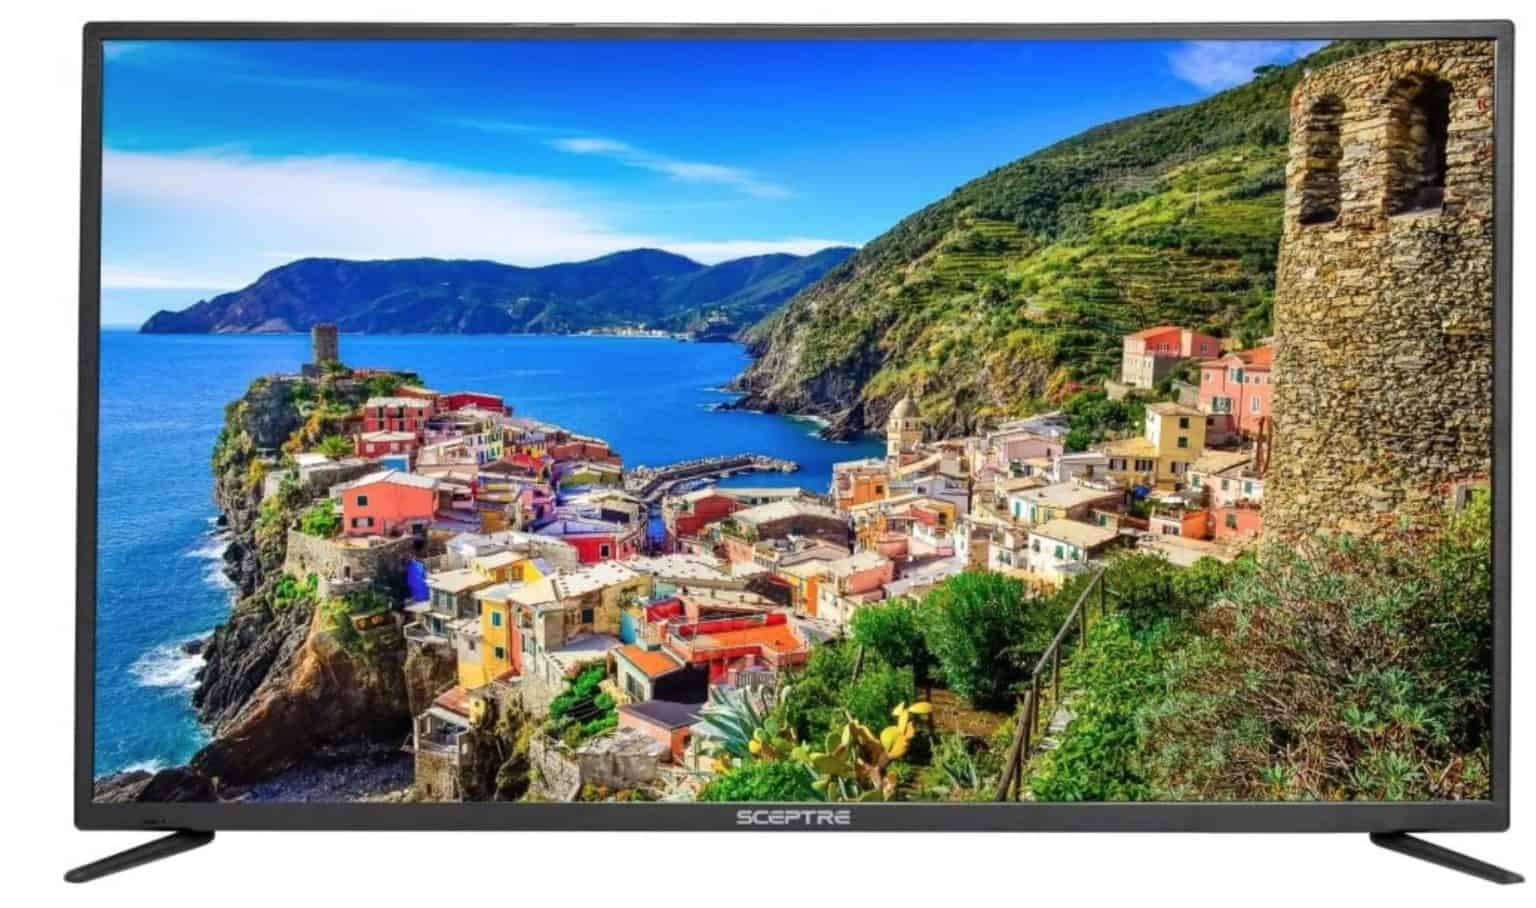 What’s The Best NonSmart TV Sold Today? Help At My Home